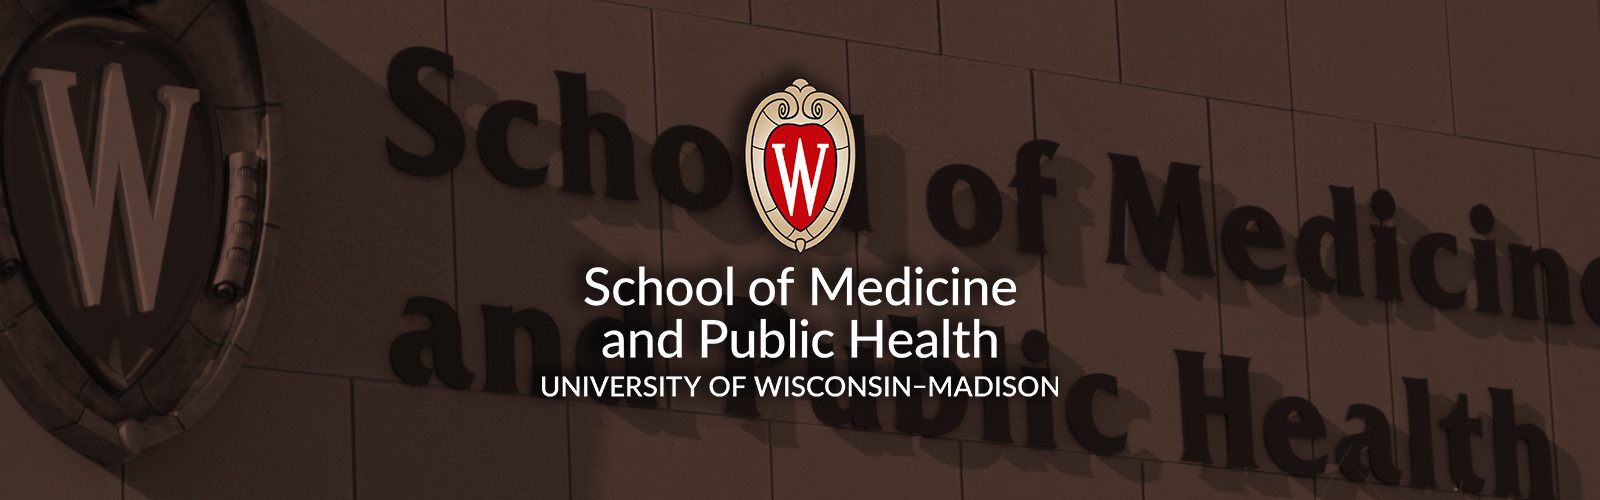 logo for School of Medicine and Public Health, University of Wisconsin-Madison